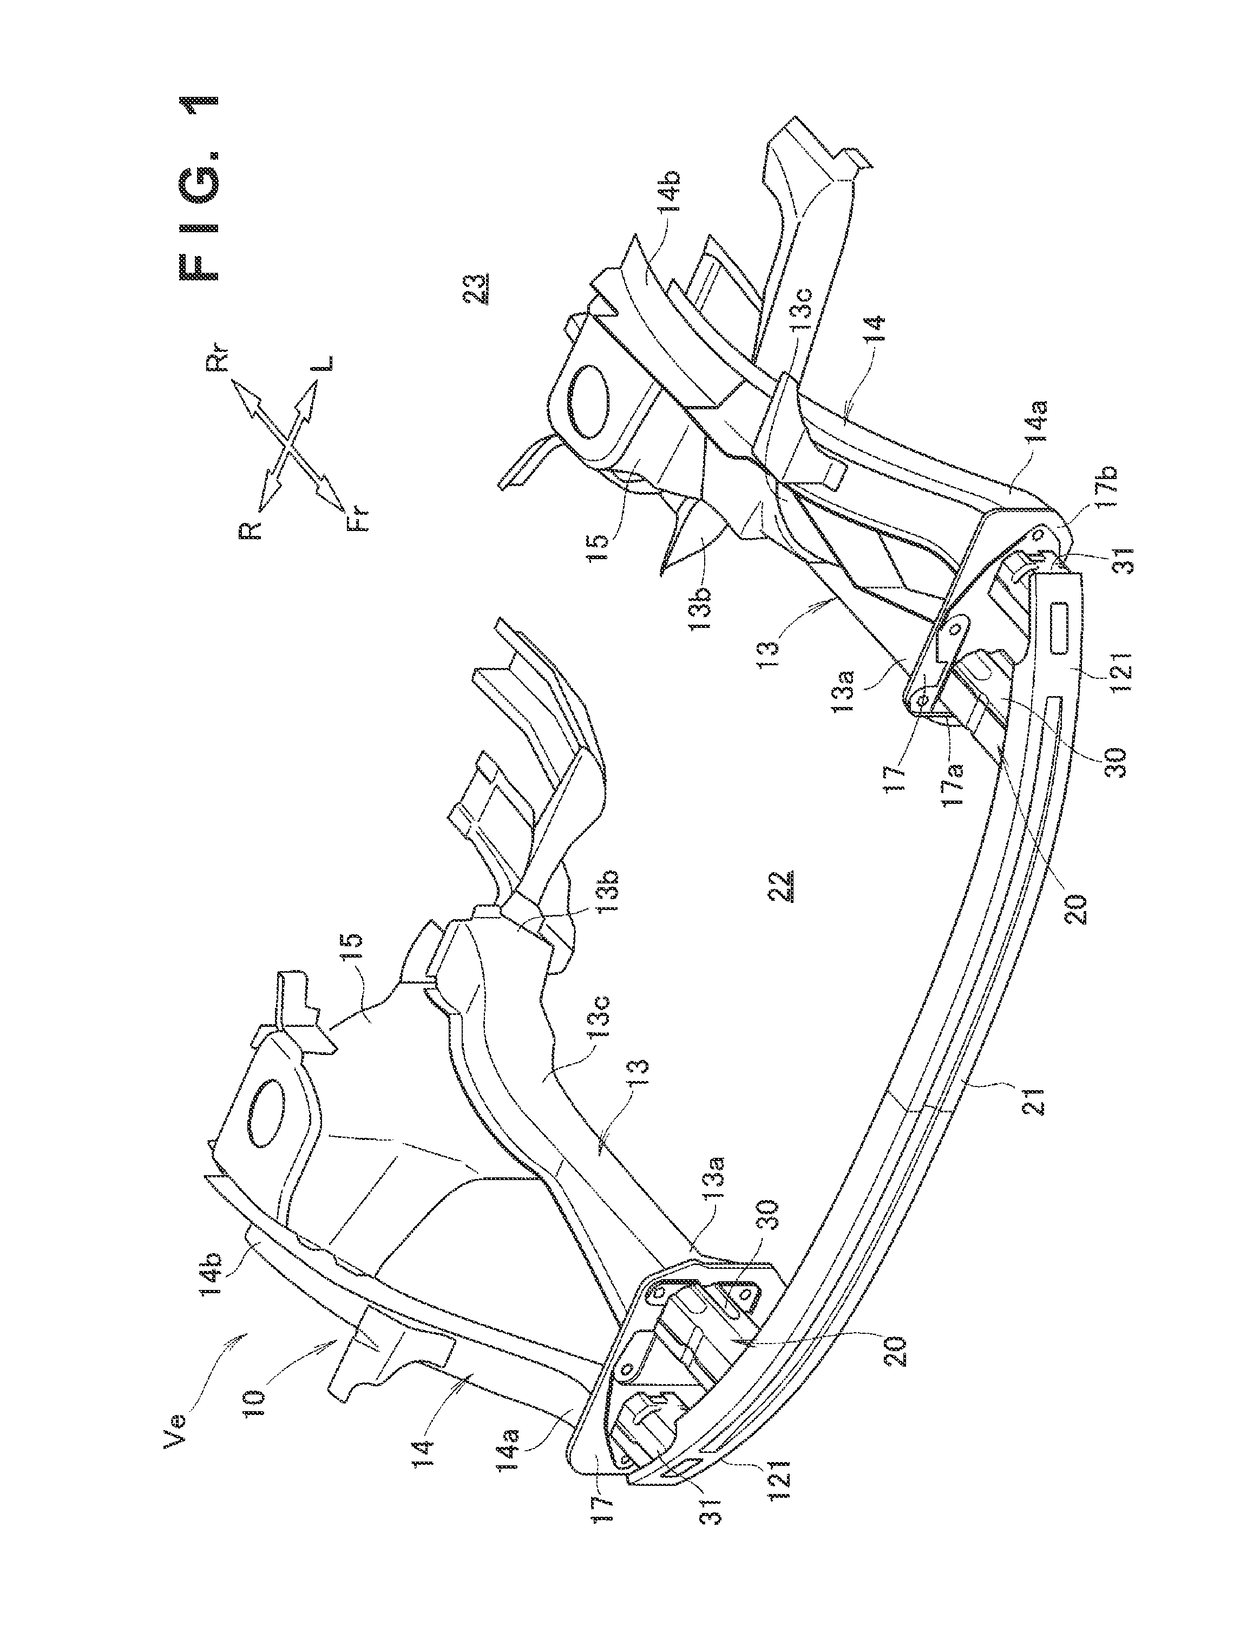 Vehicle body structure with impact absorbing part